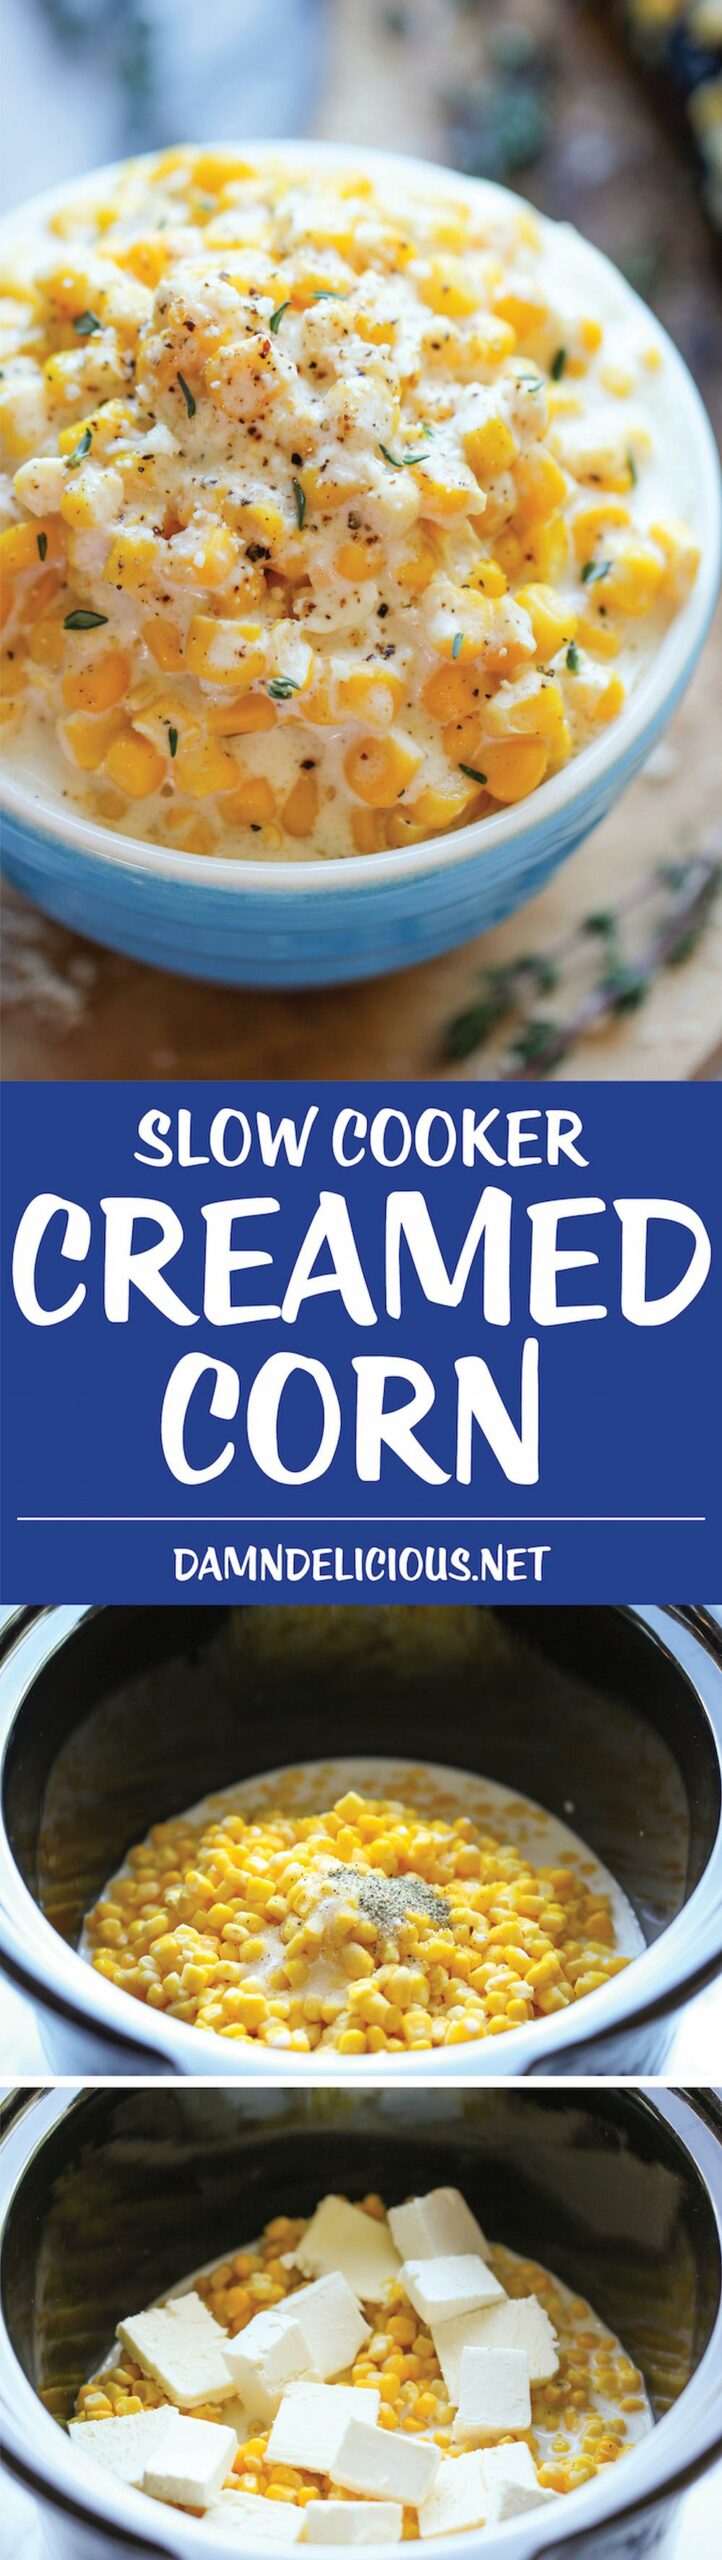 Slow cooker creamed corn easy thanksgiving recipes